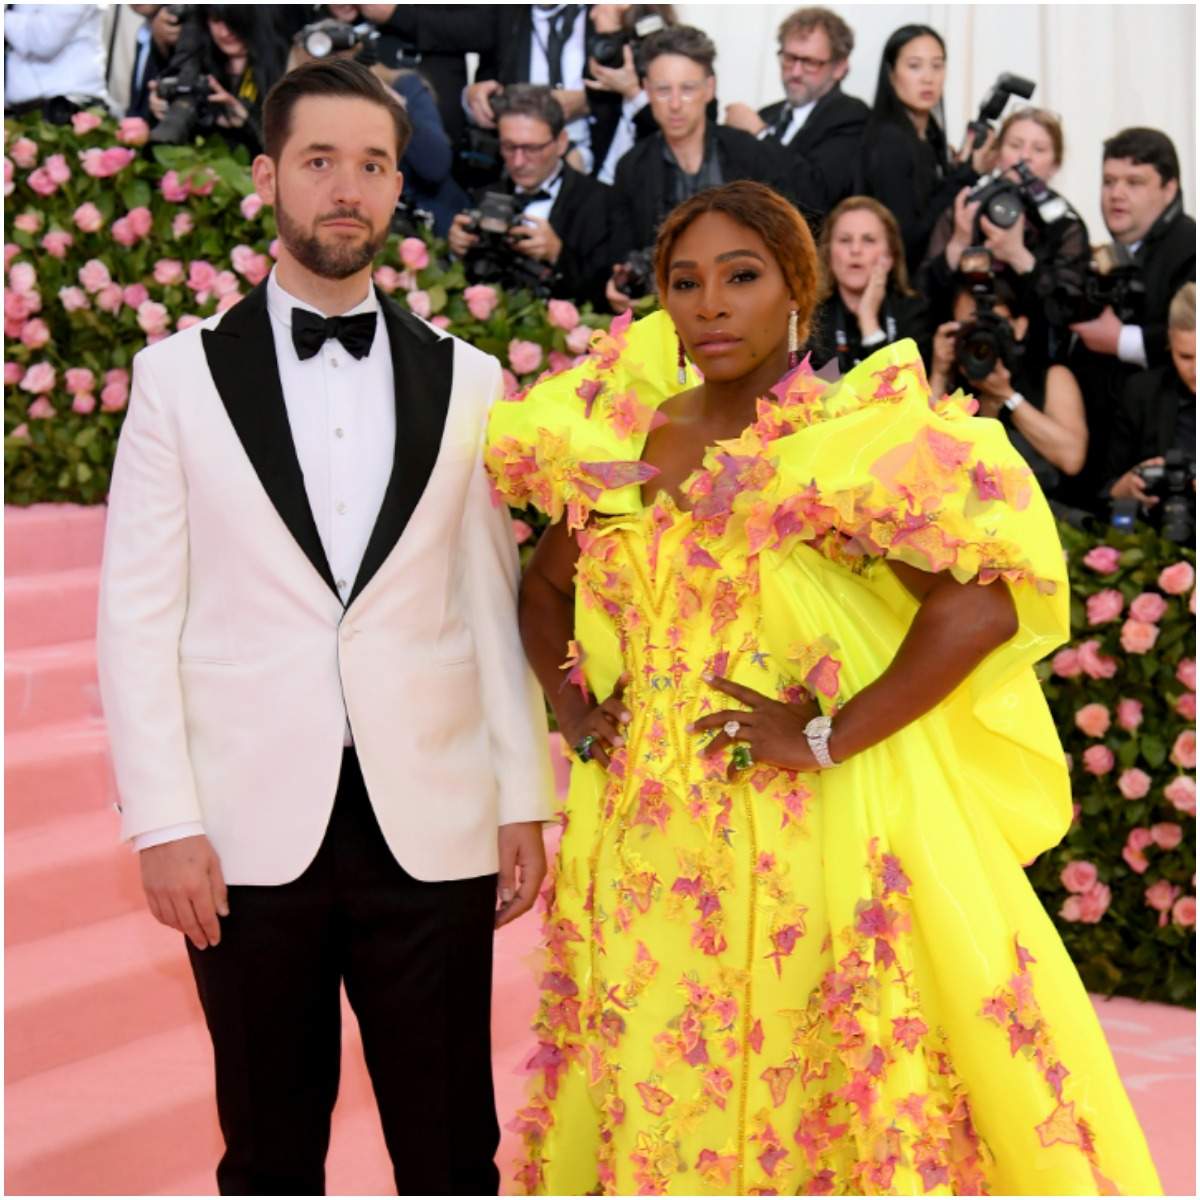 Serena Williams with her husband Alexis Ohanian